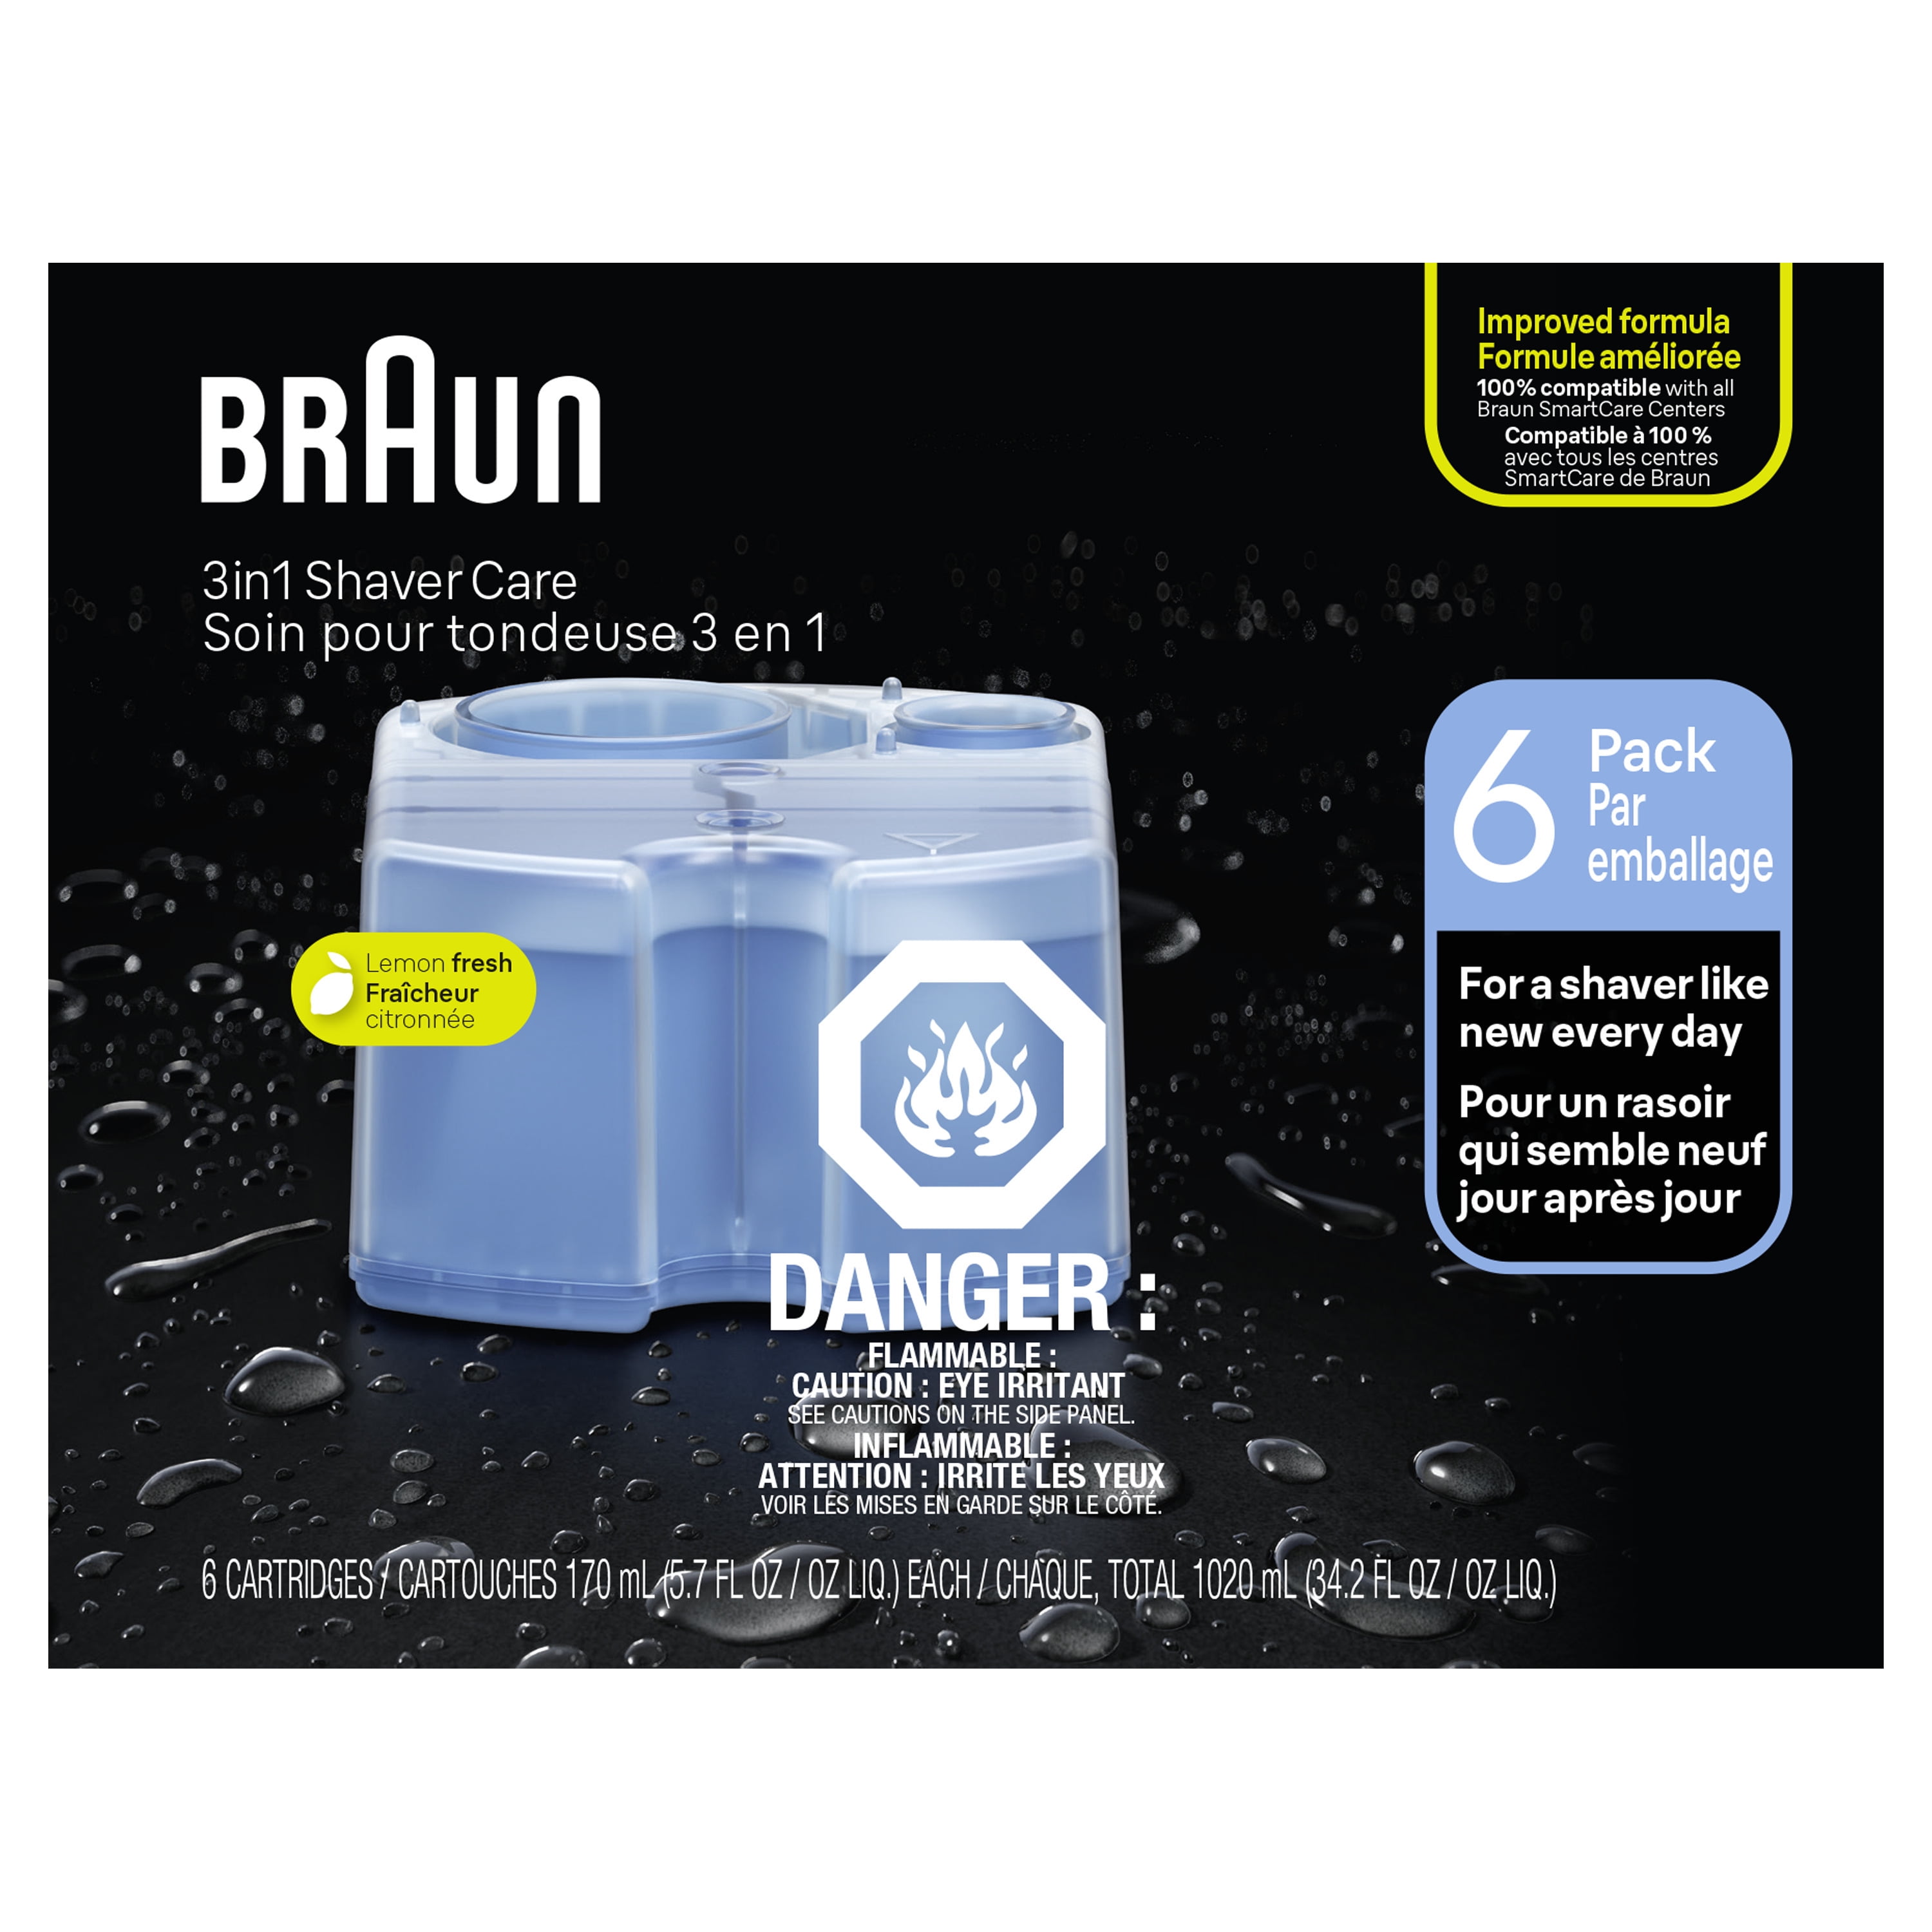 Braun CCR5+1 Clean & Renew Cleaning Cartridge, 6 Piece - Imported Products  from USA - iBhejo